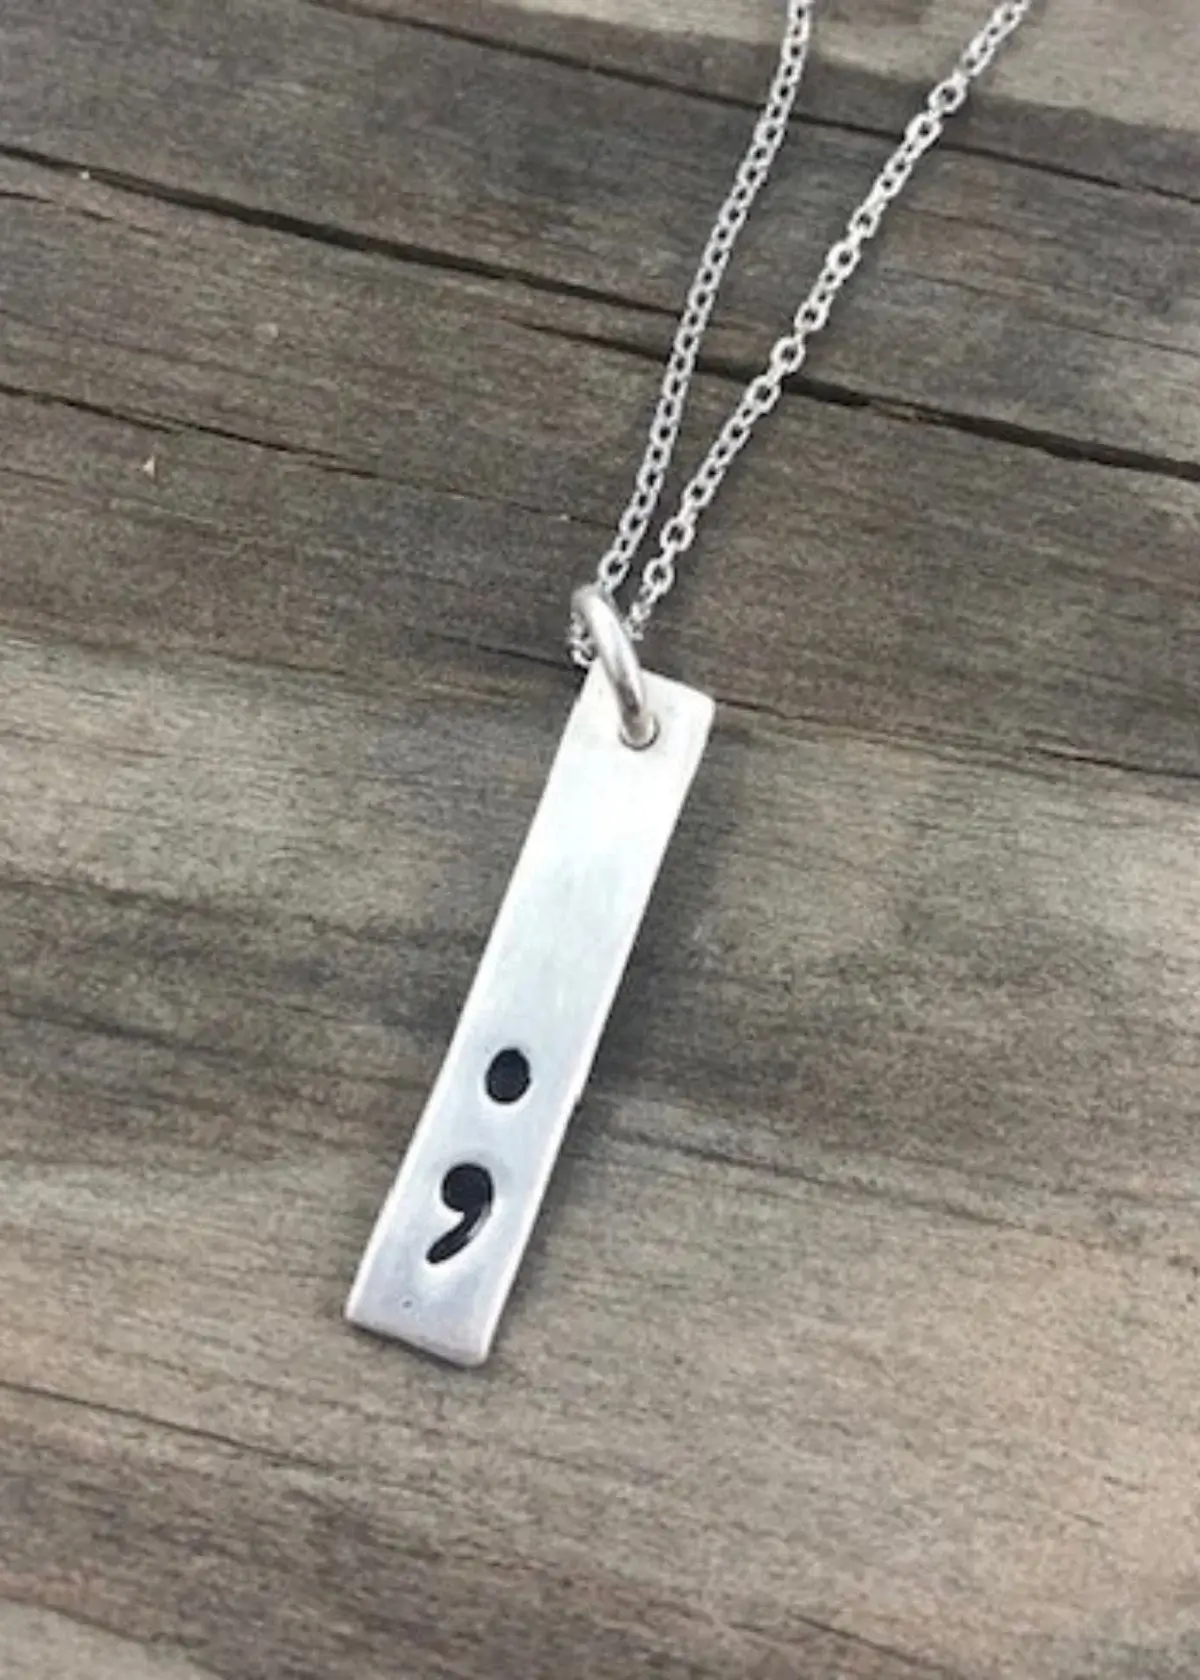 How to Choose the Right Semicolon Necklace?